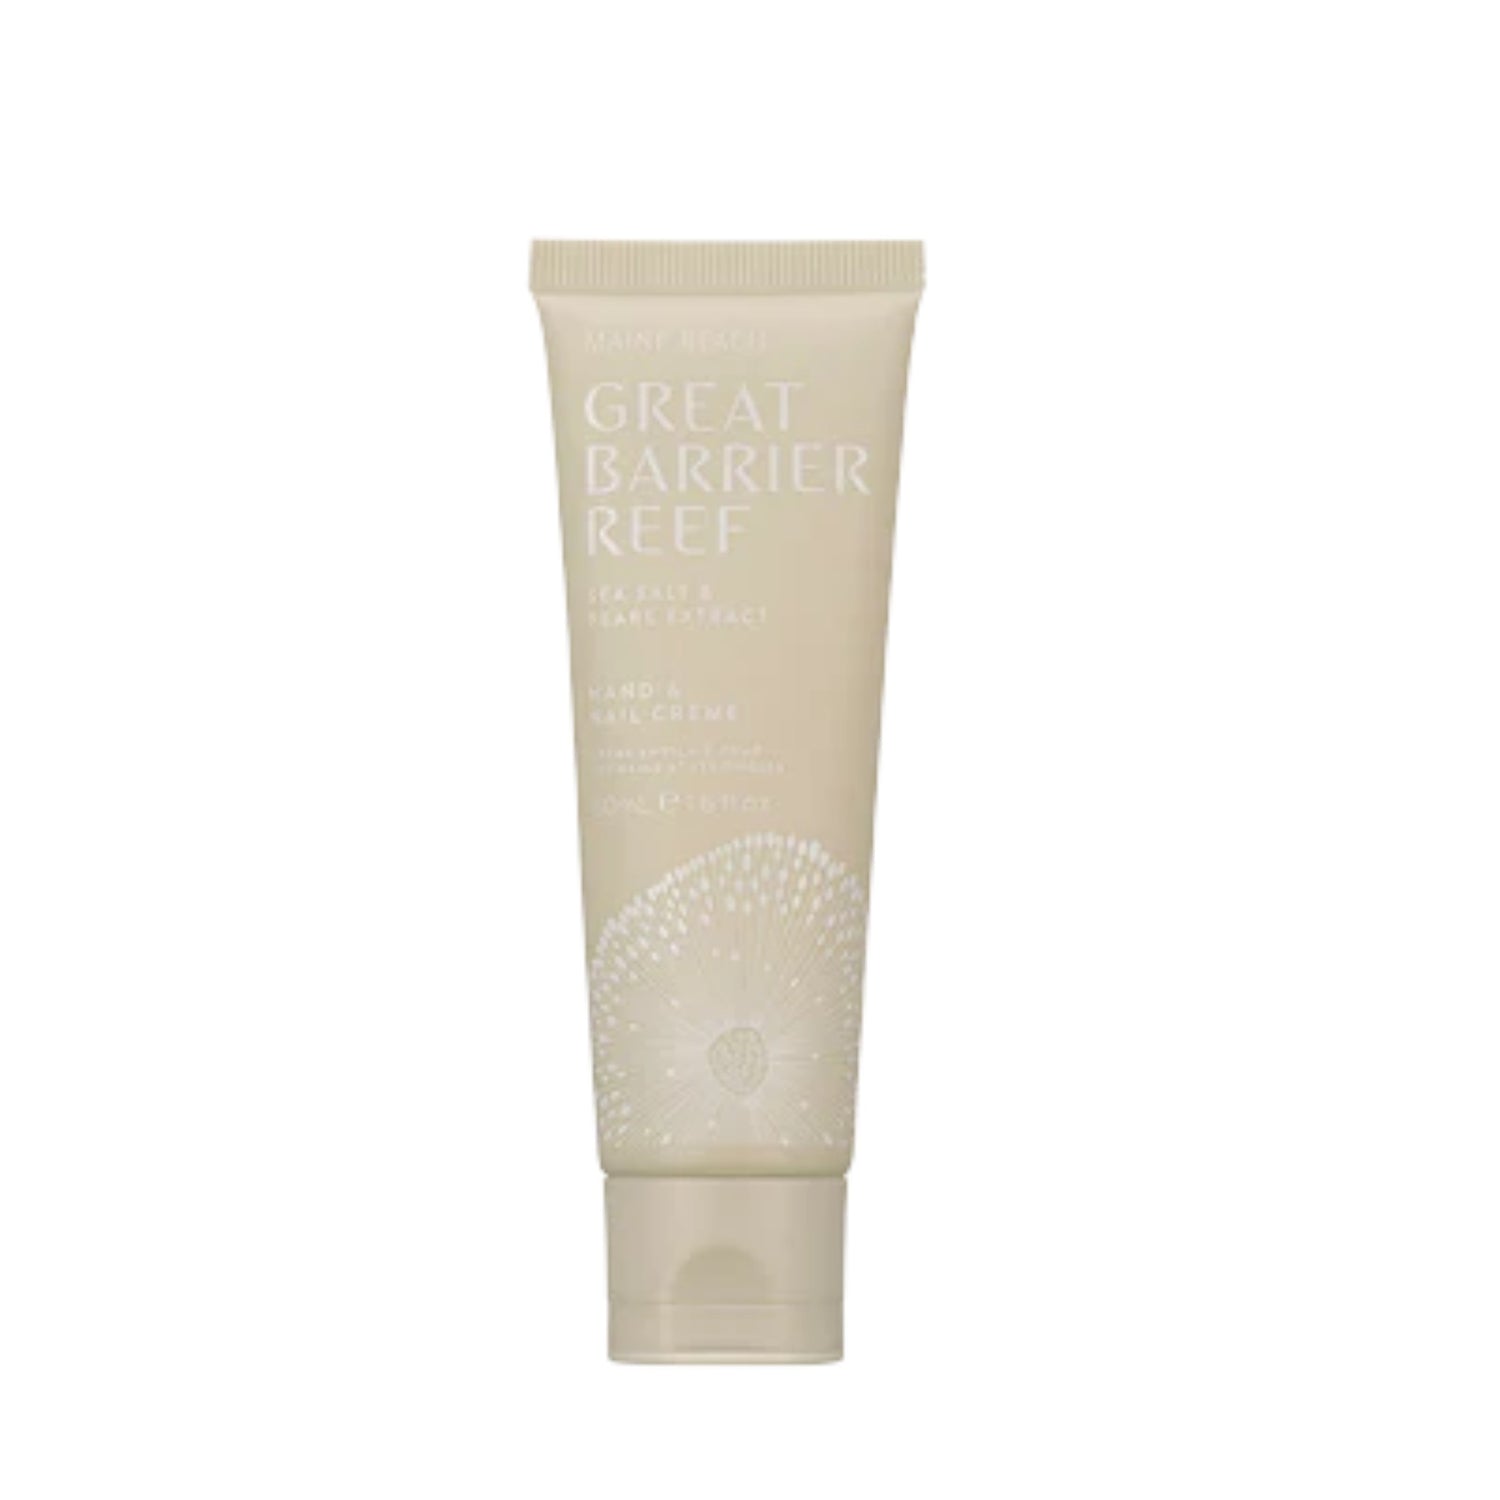 Great Barrier Reef Hand & Nail Creme 50ml